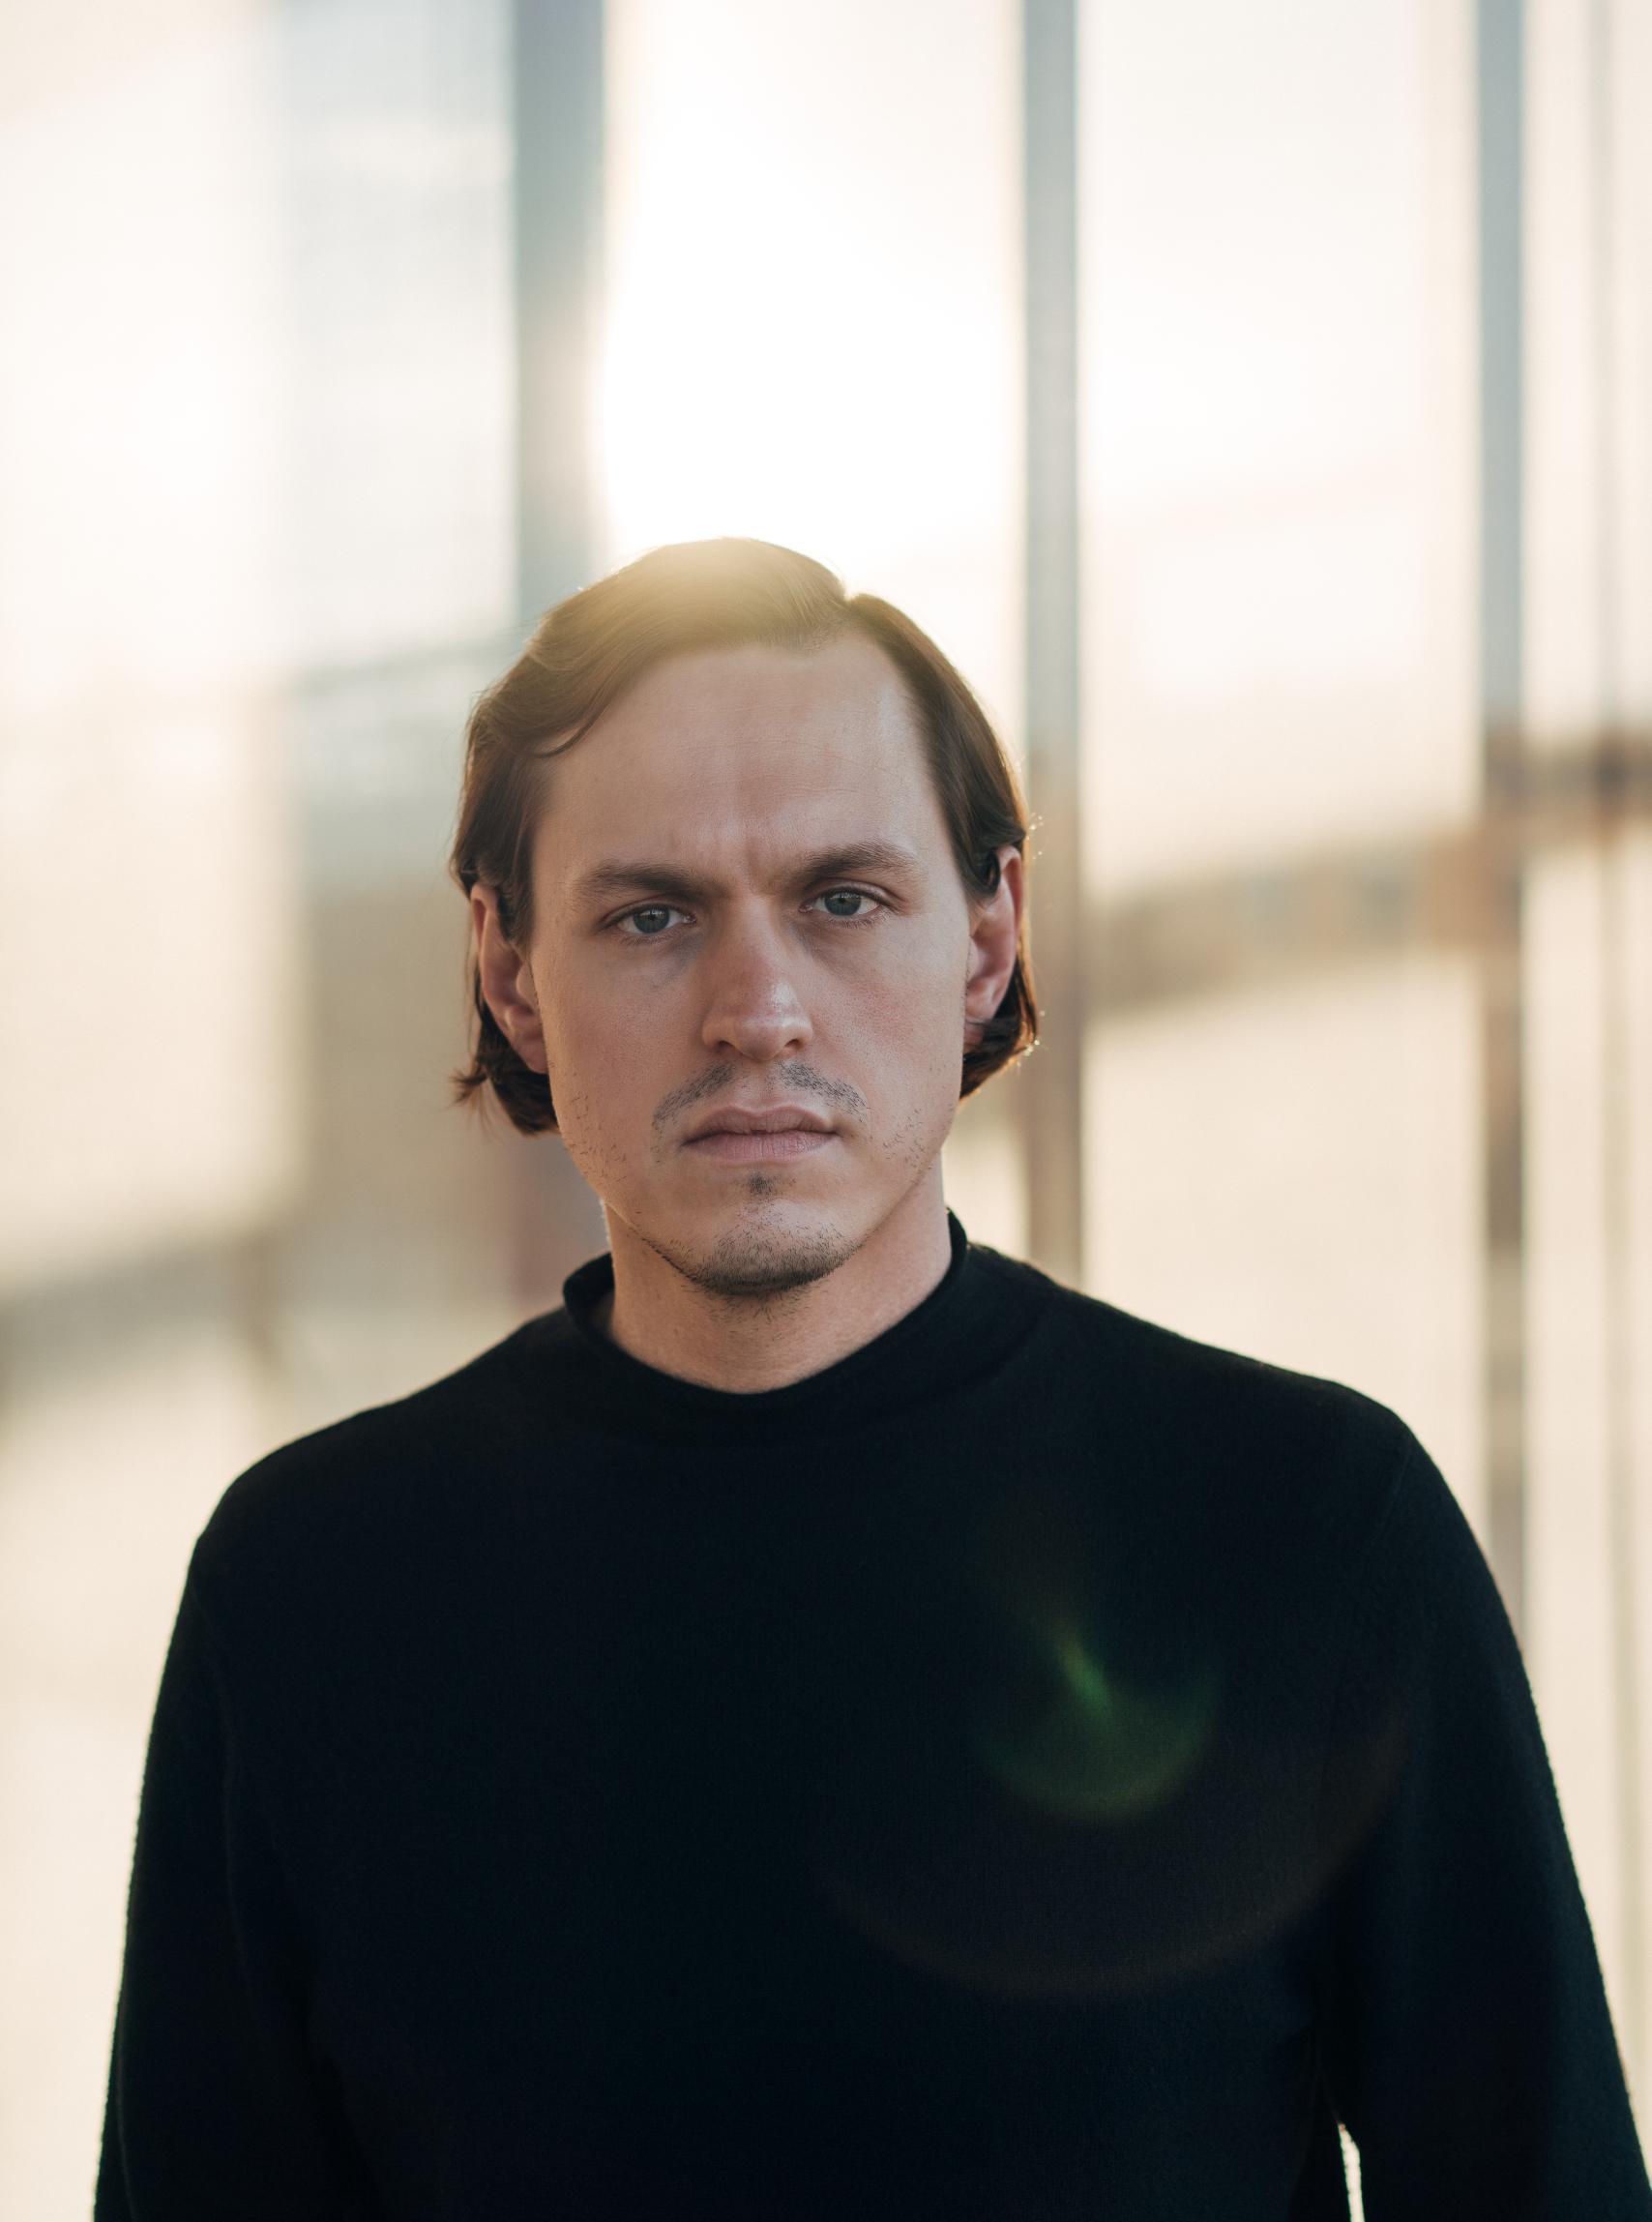 Pianist Lorenz Kellhuber wears a black sweater and looks into the camera with a serious expression.